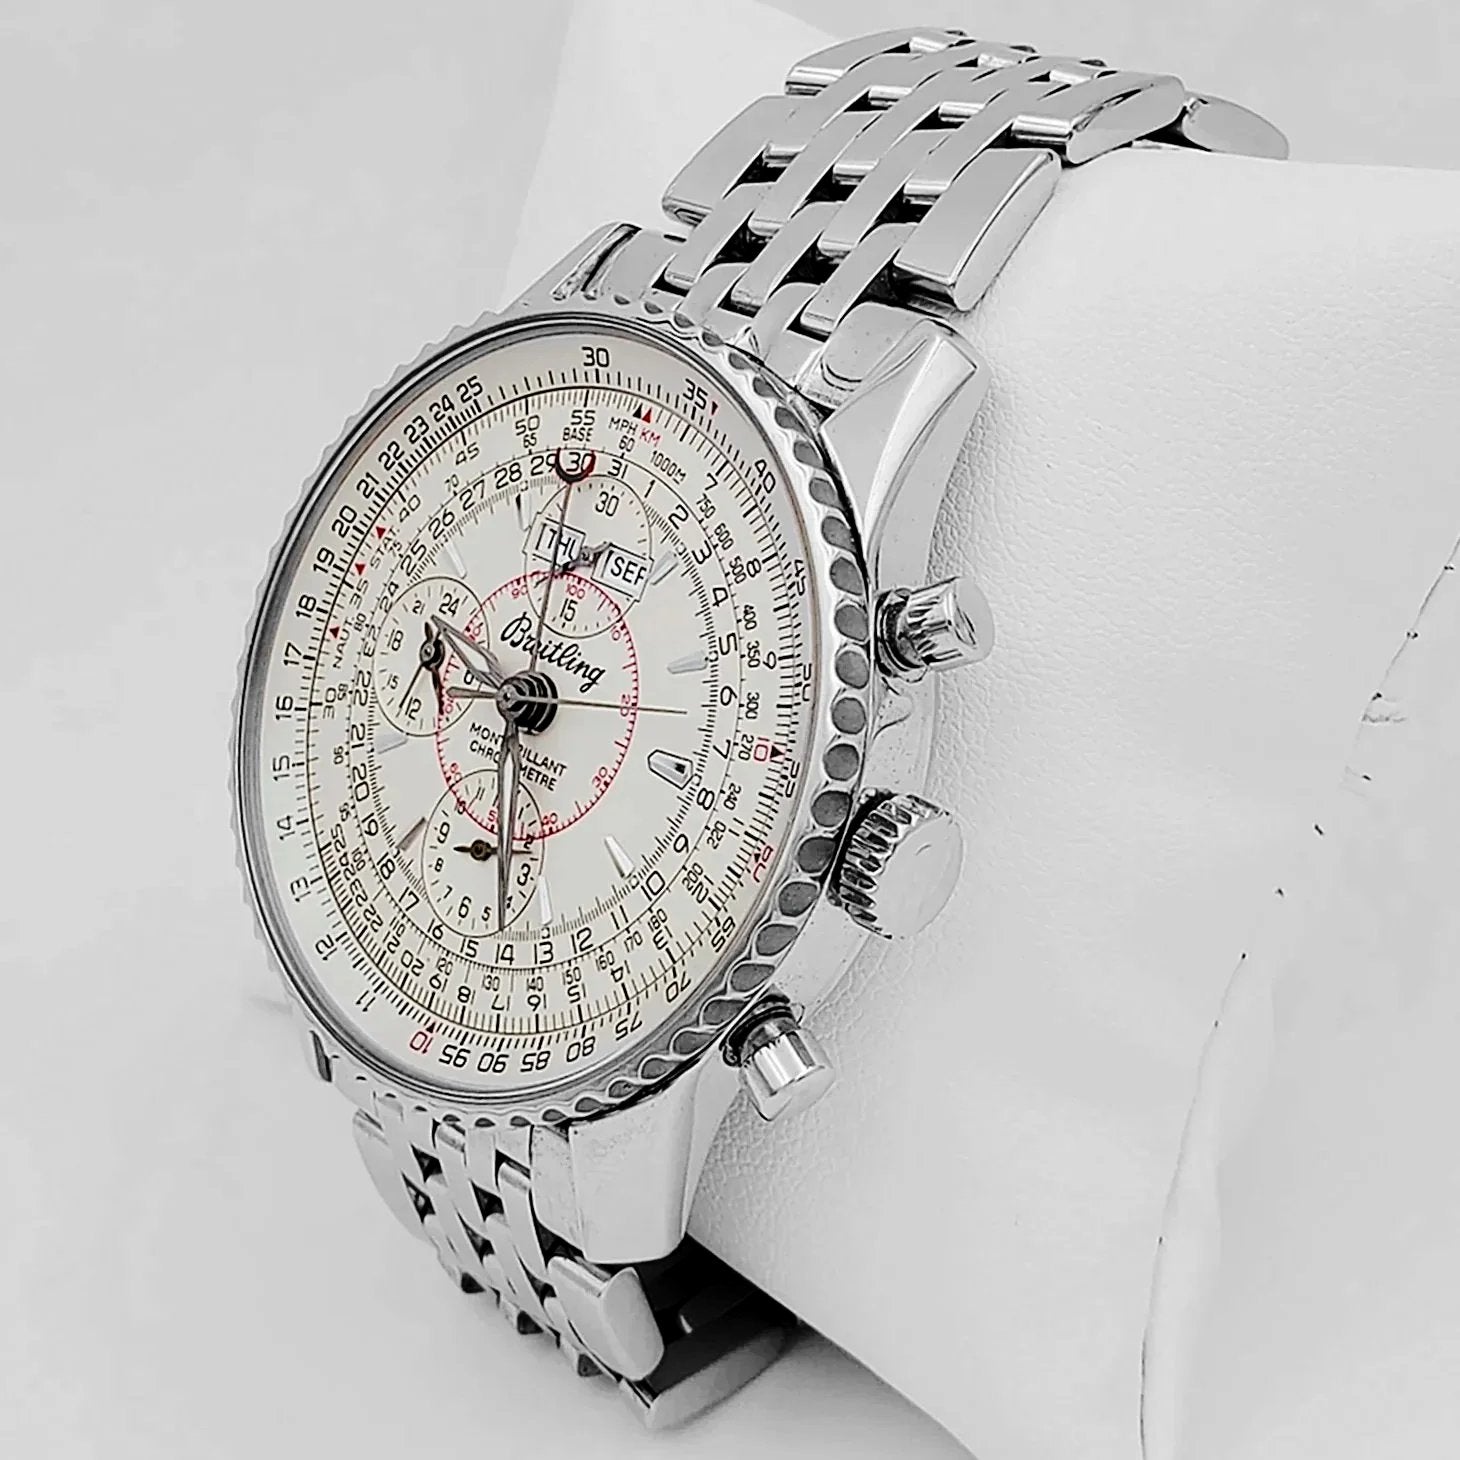 Men's Breitling A21330 Navitimer Montbrillan 42mm Chronograph Stainless Steel Watch with White Dial. (Pre-Owned)